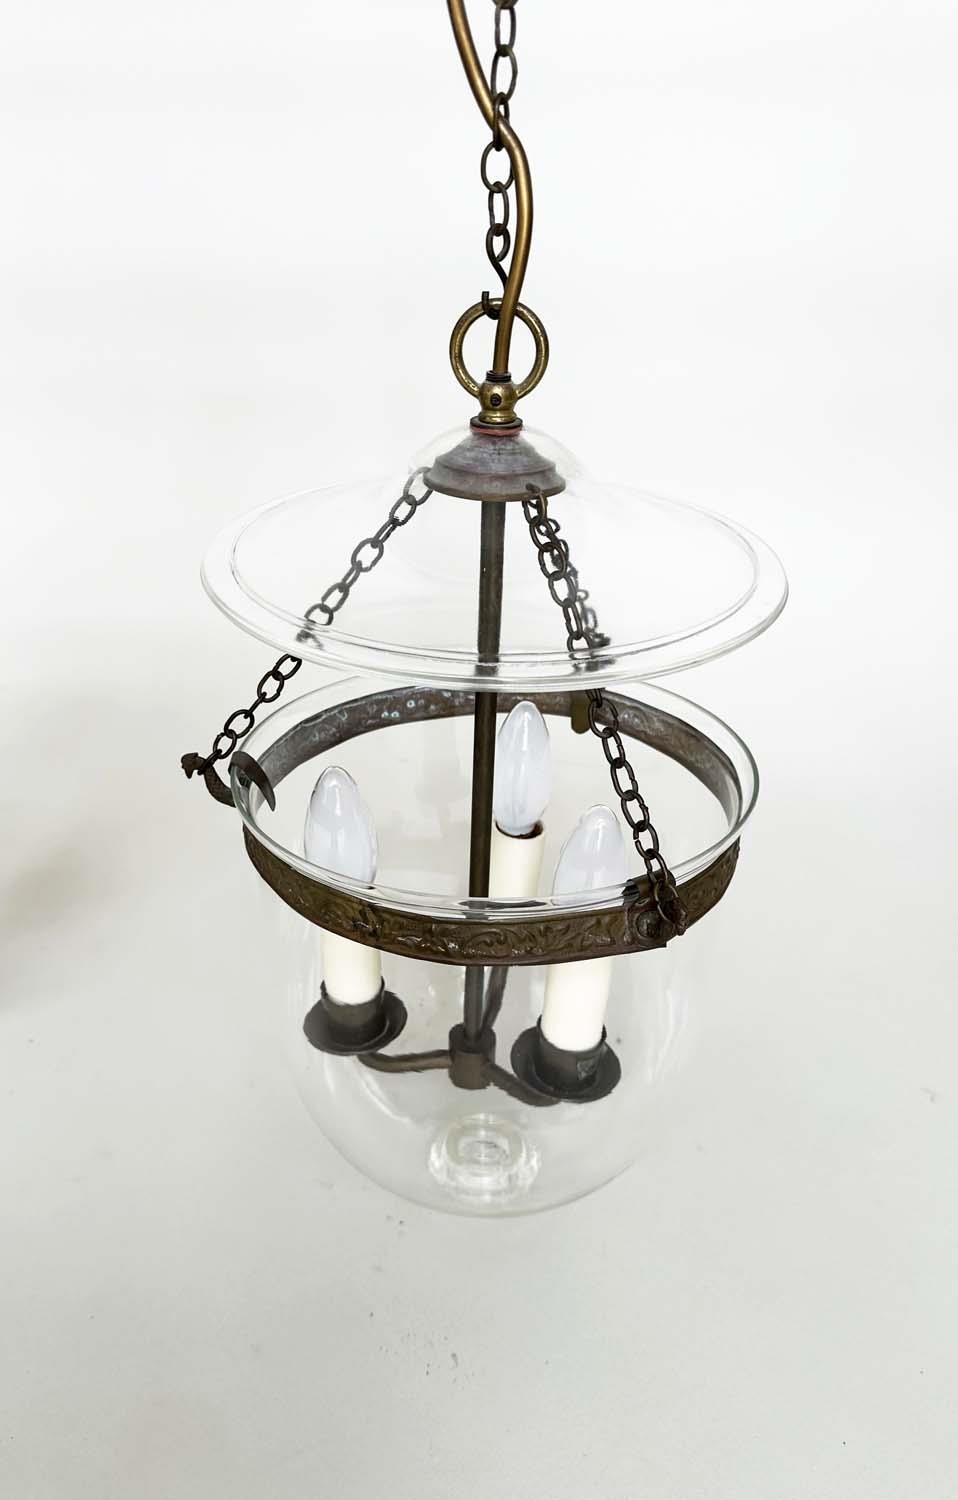 HALL LANTERNS, a pair, glass and bronzed metal each with three lights, 40cm H x 23cm. (2) - Image 2 of 4